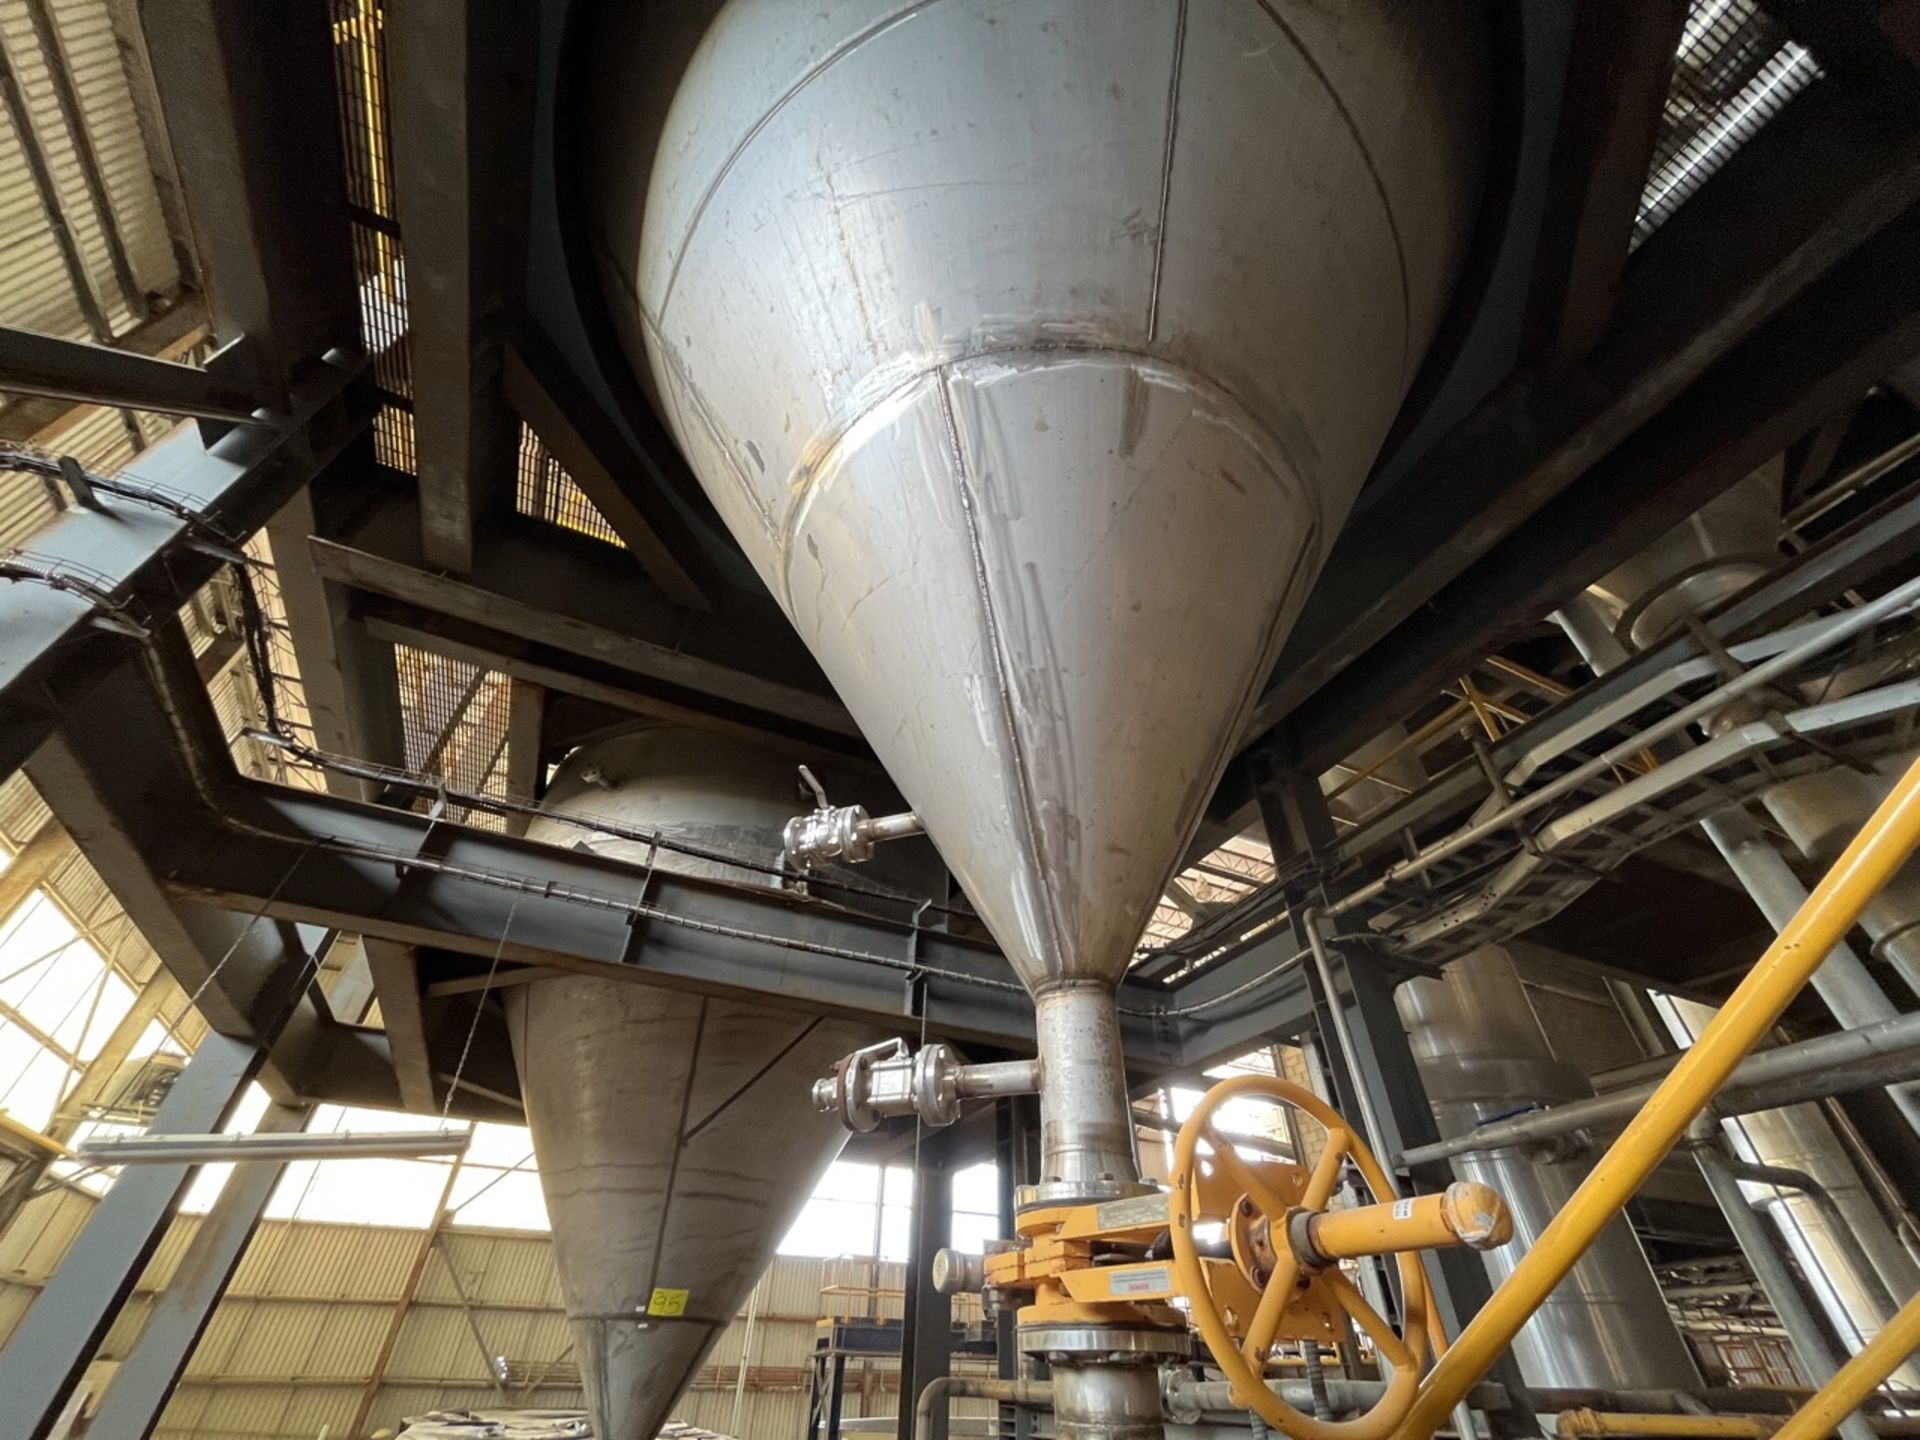 Conical storage tank with stainless steel toriesferica lid measures approximately 4.30 meters in di - Image 19 of 37